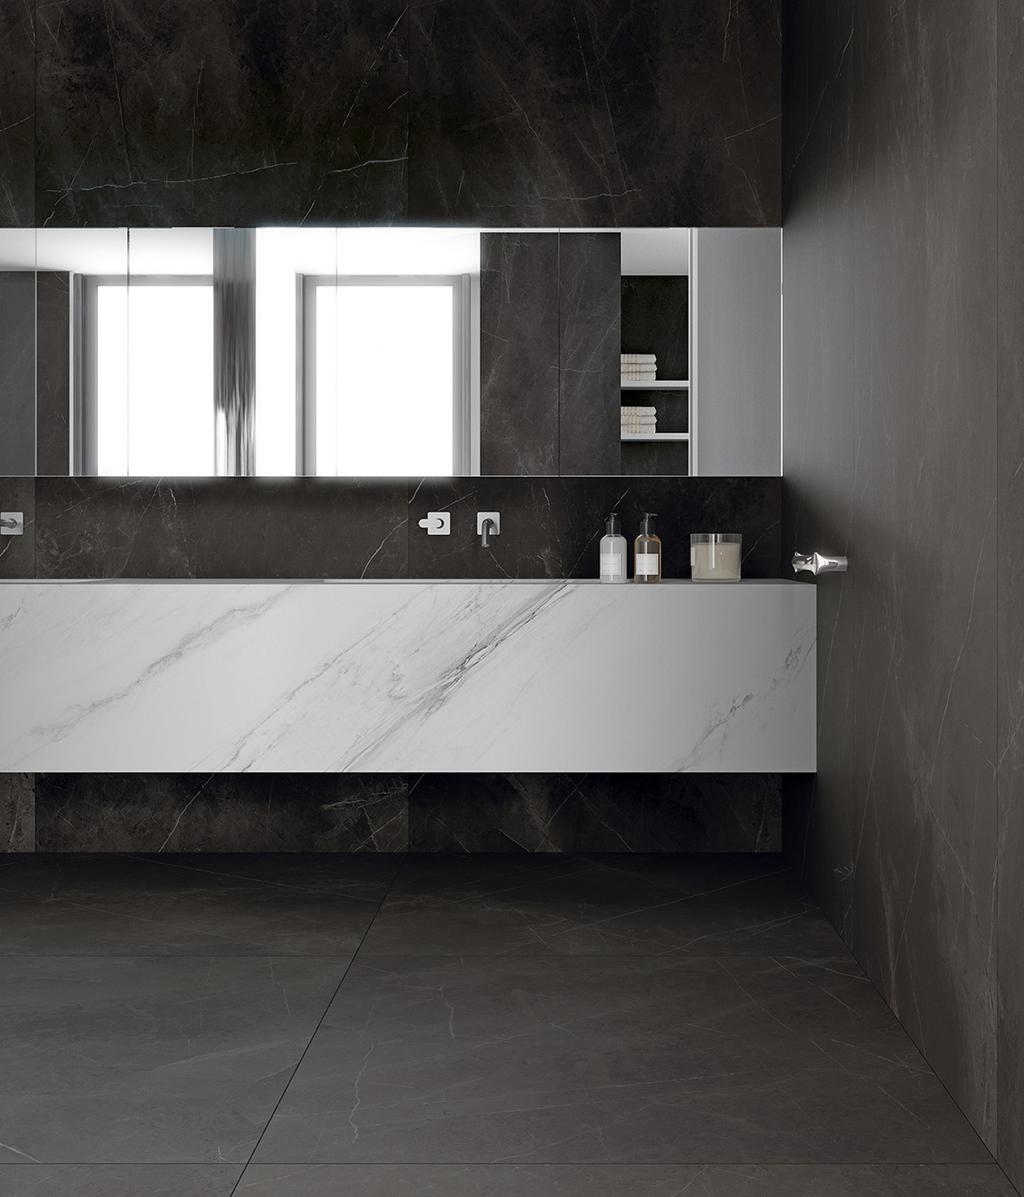 Istone intelligent stoneware porcelain bench material. A collaboration of the very best that Europe has to offer.